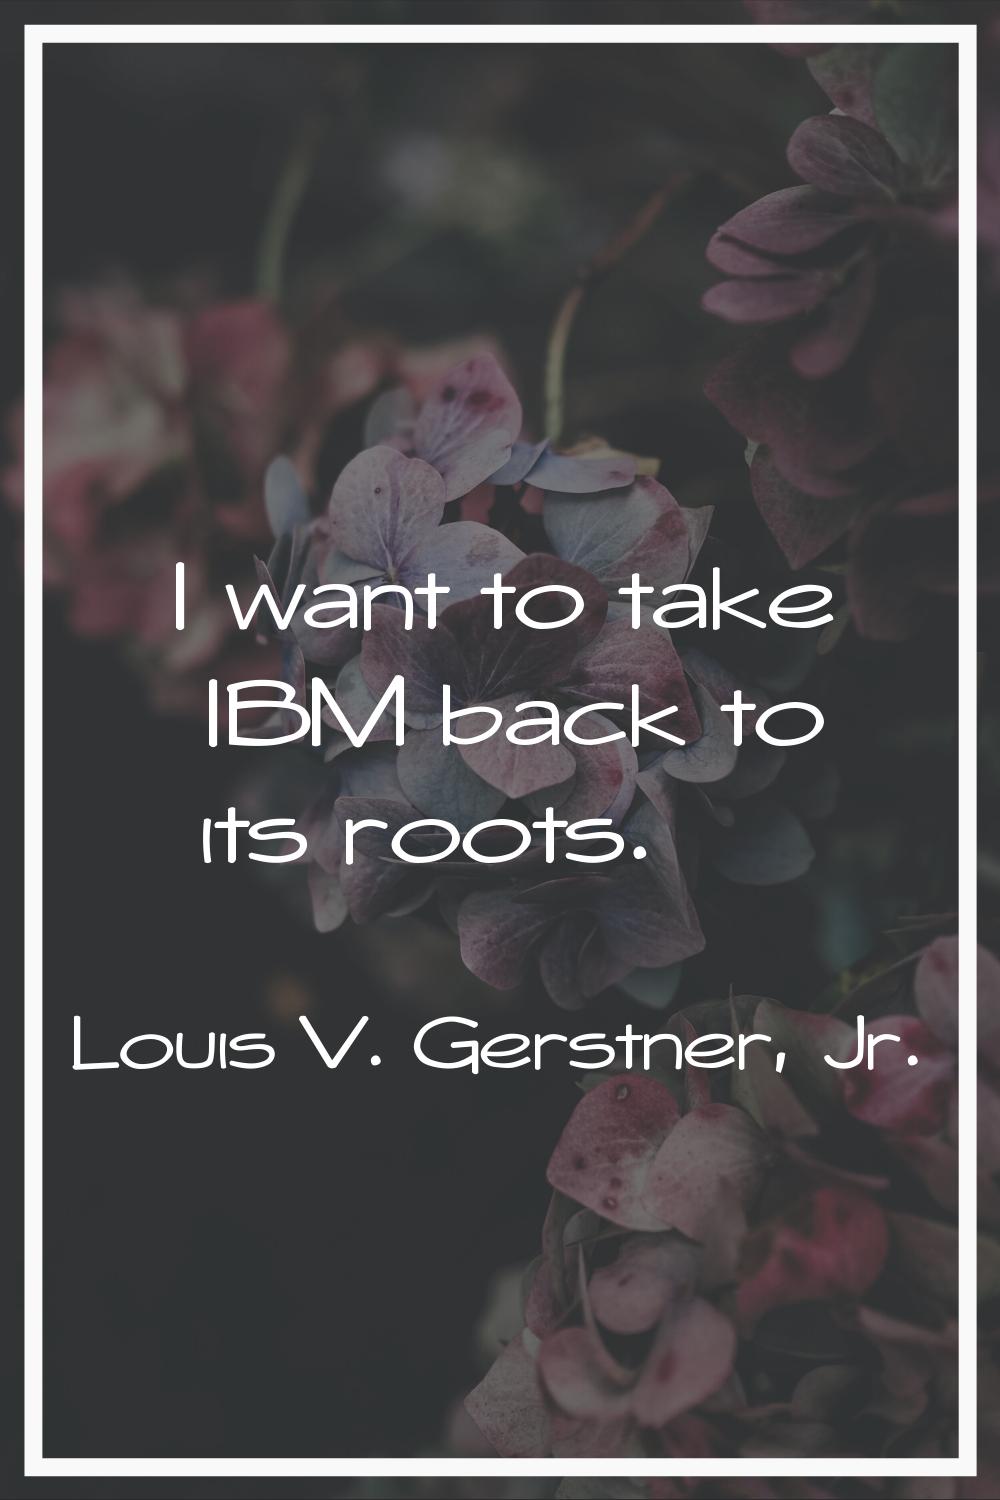 I want to take IBM back to its roots.